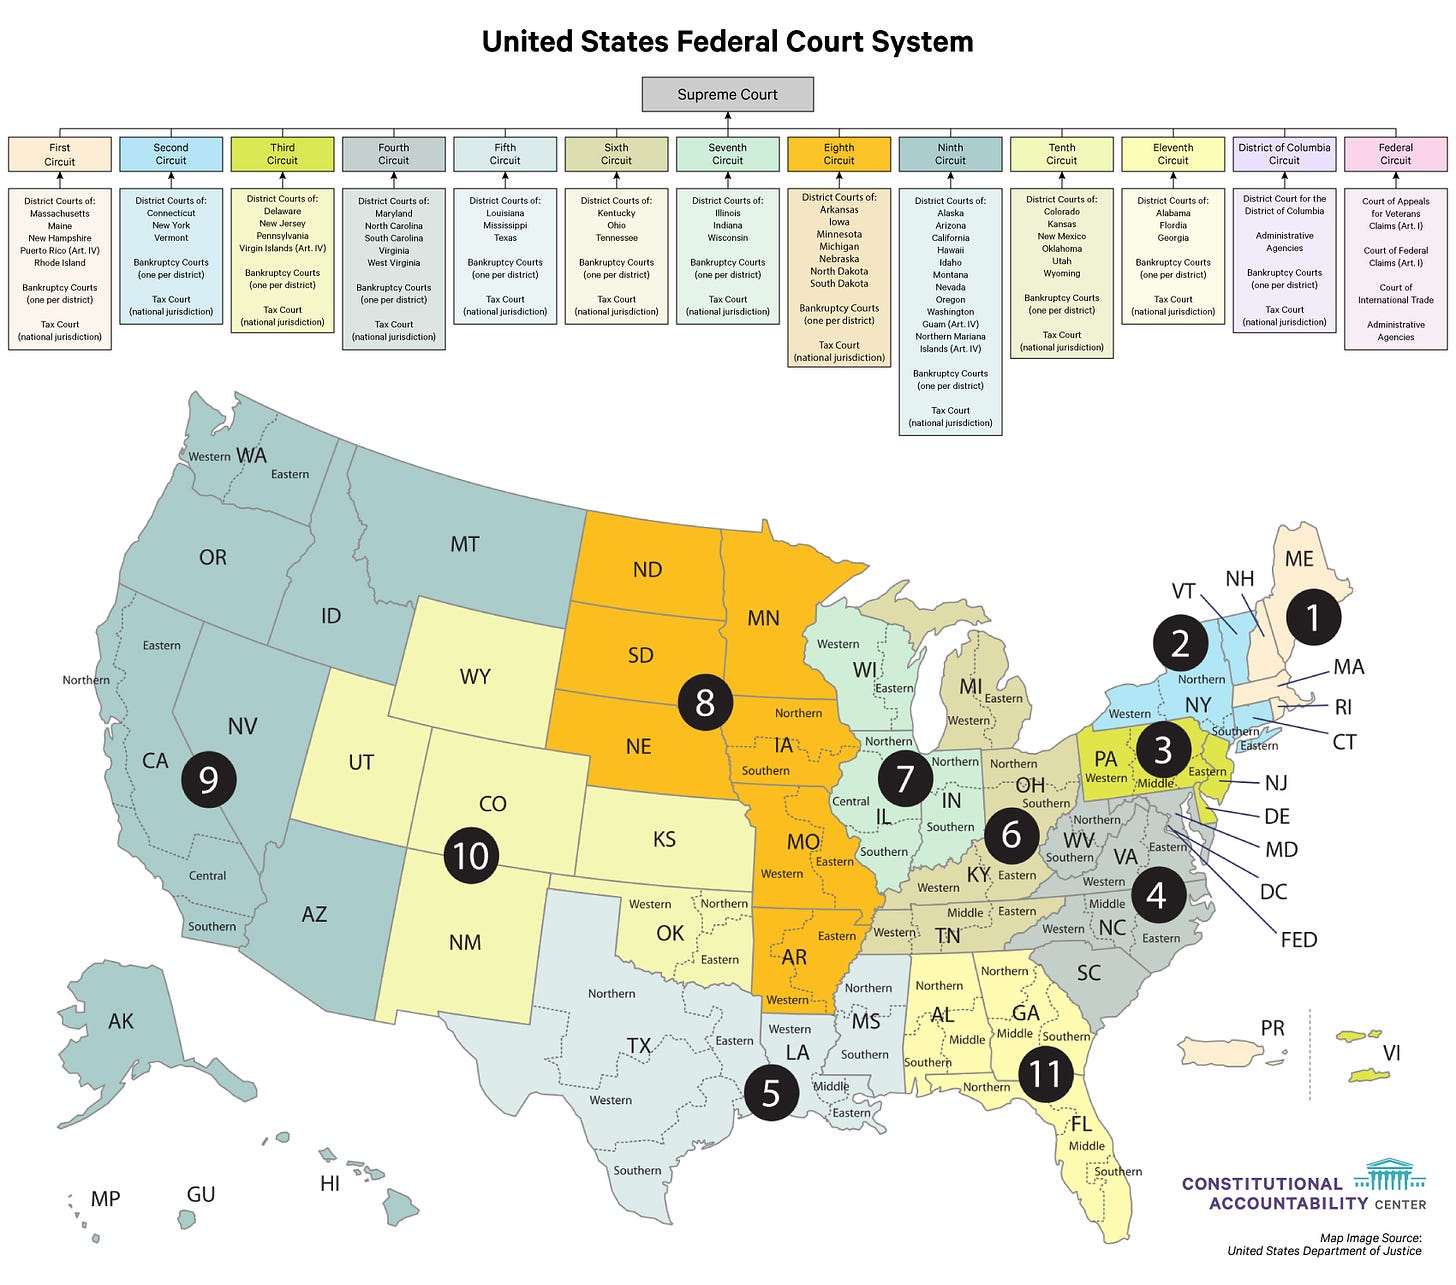 U.S. Federal Courts 101 | Constitutional Accountability Center